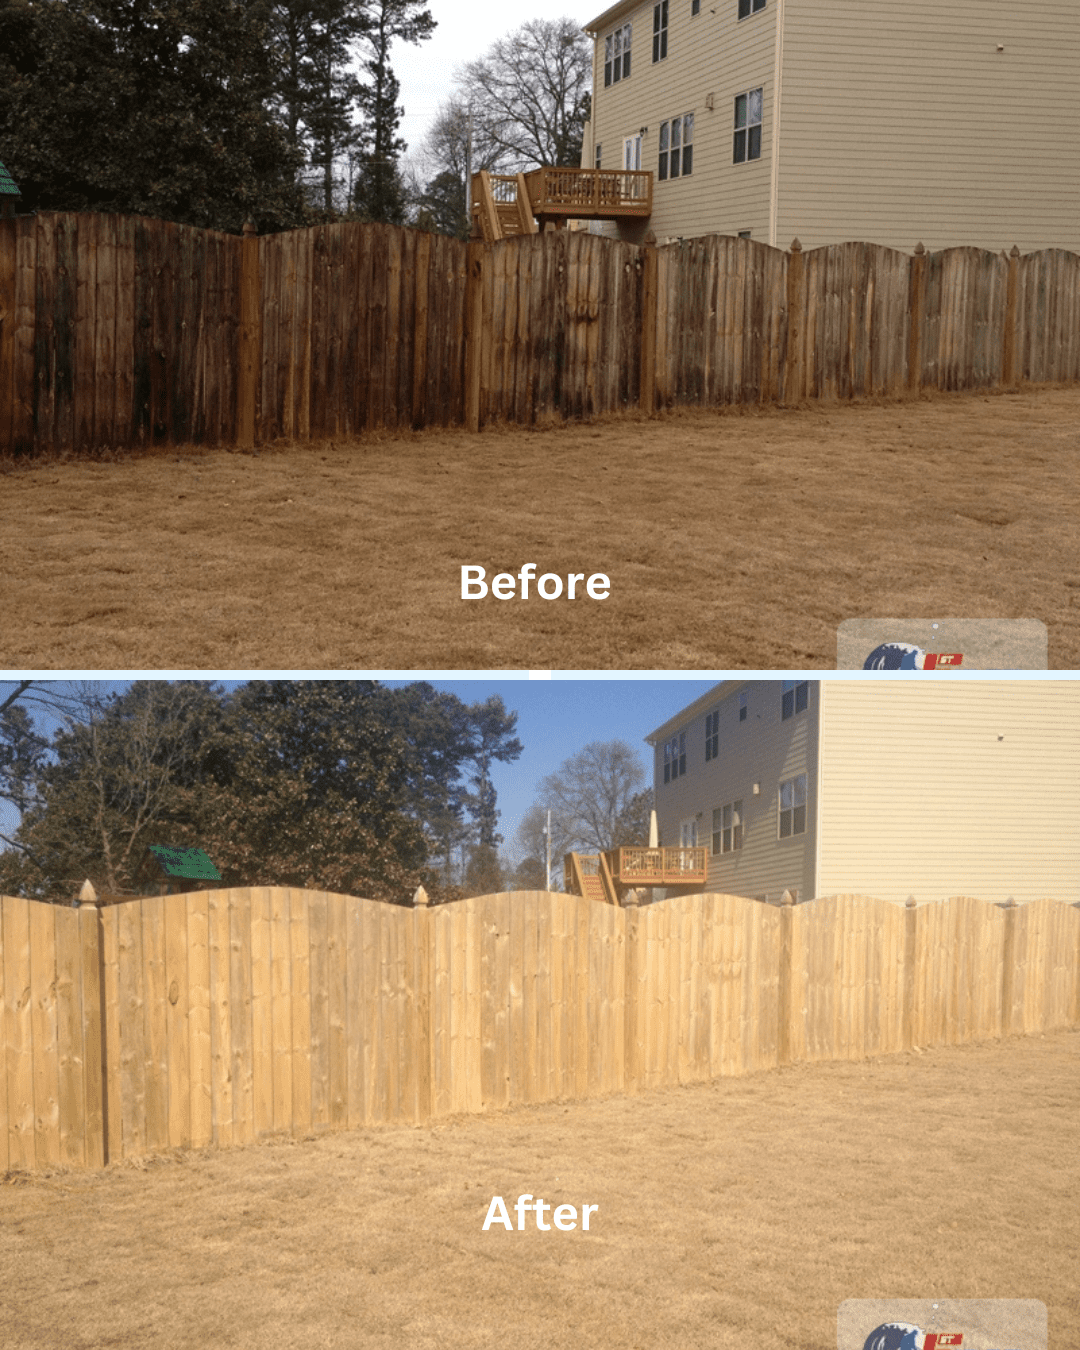 Decks & Fence Cleaning. Residential Pressure Washing Services